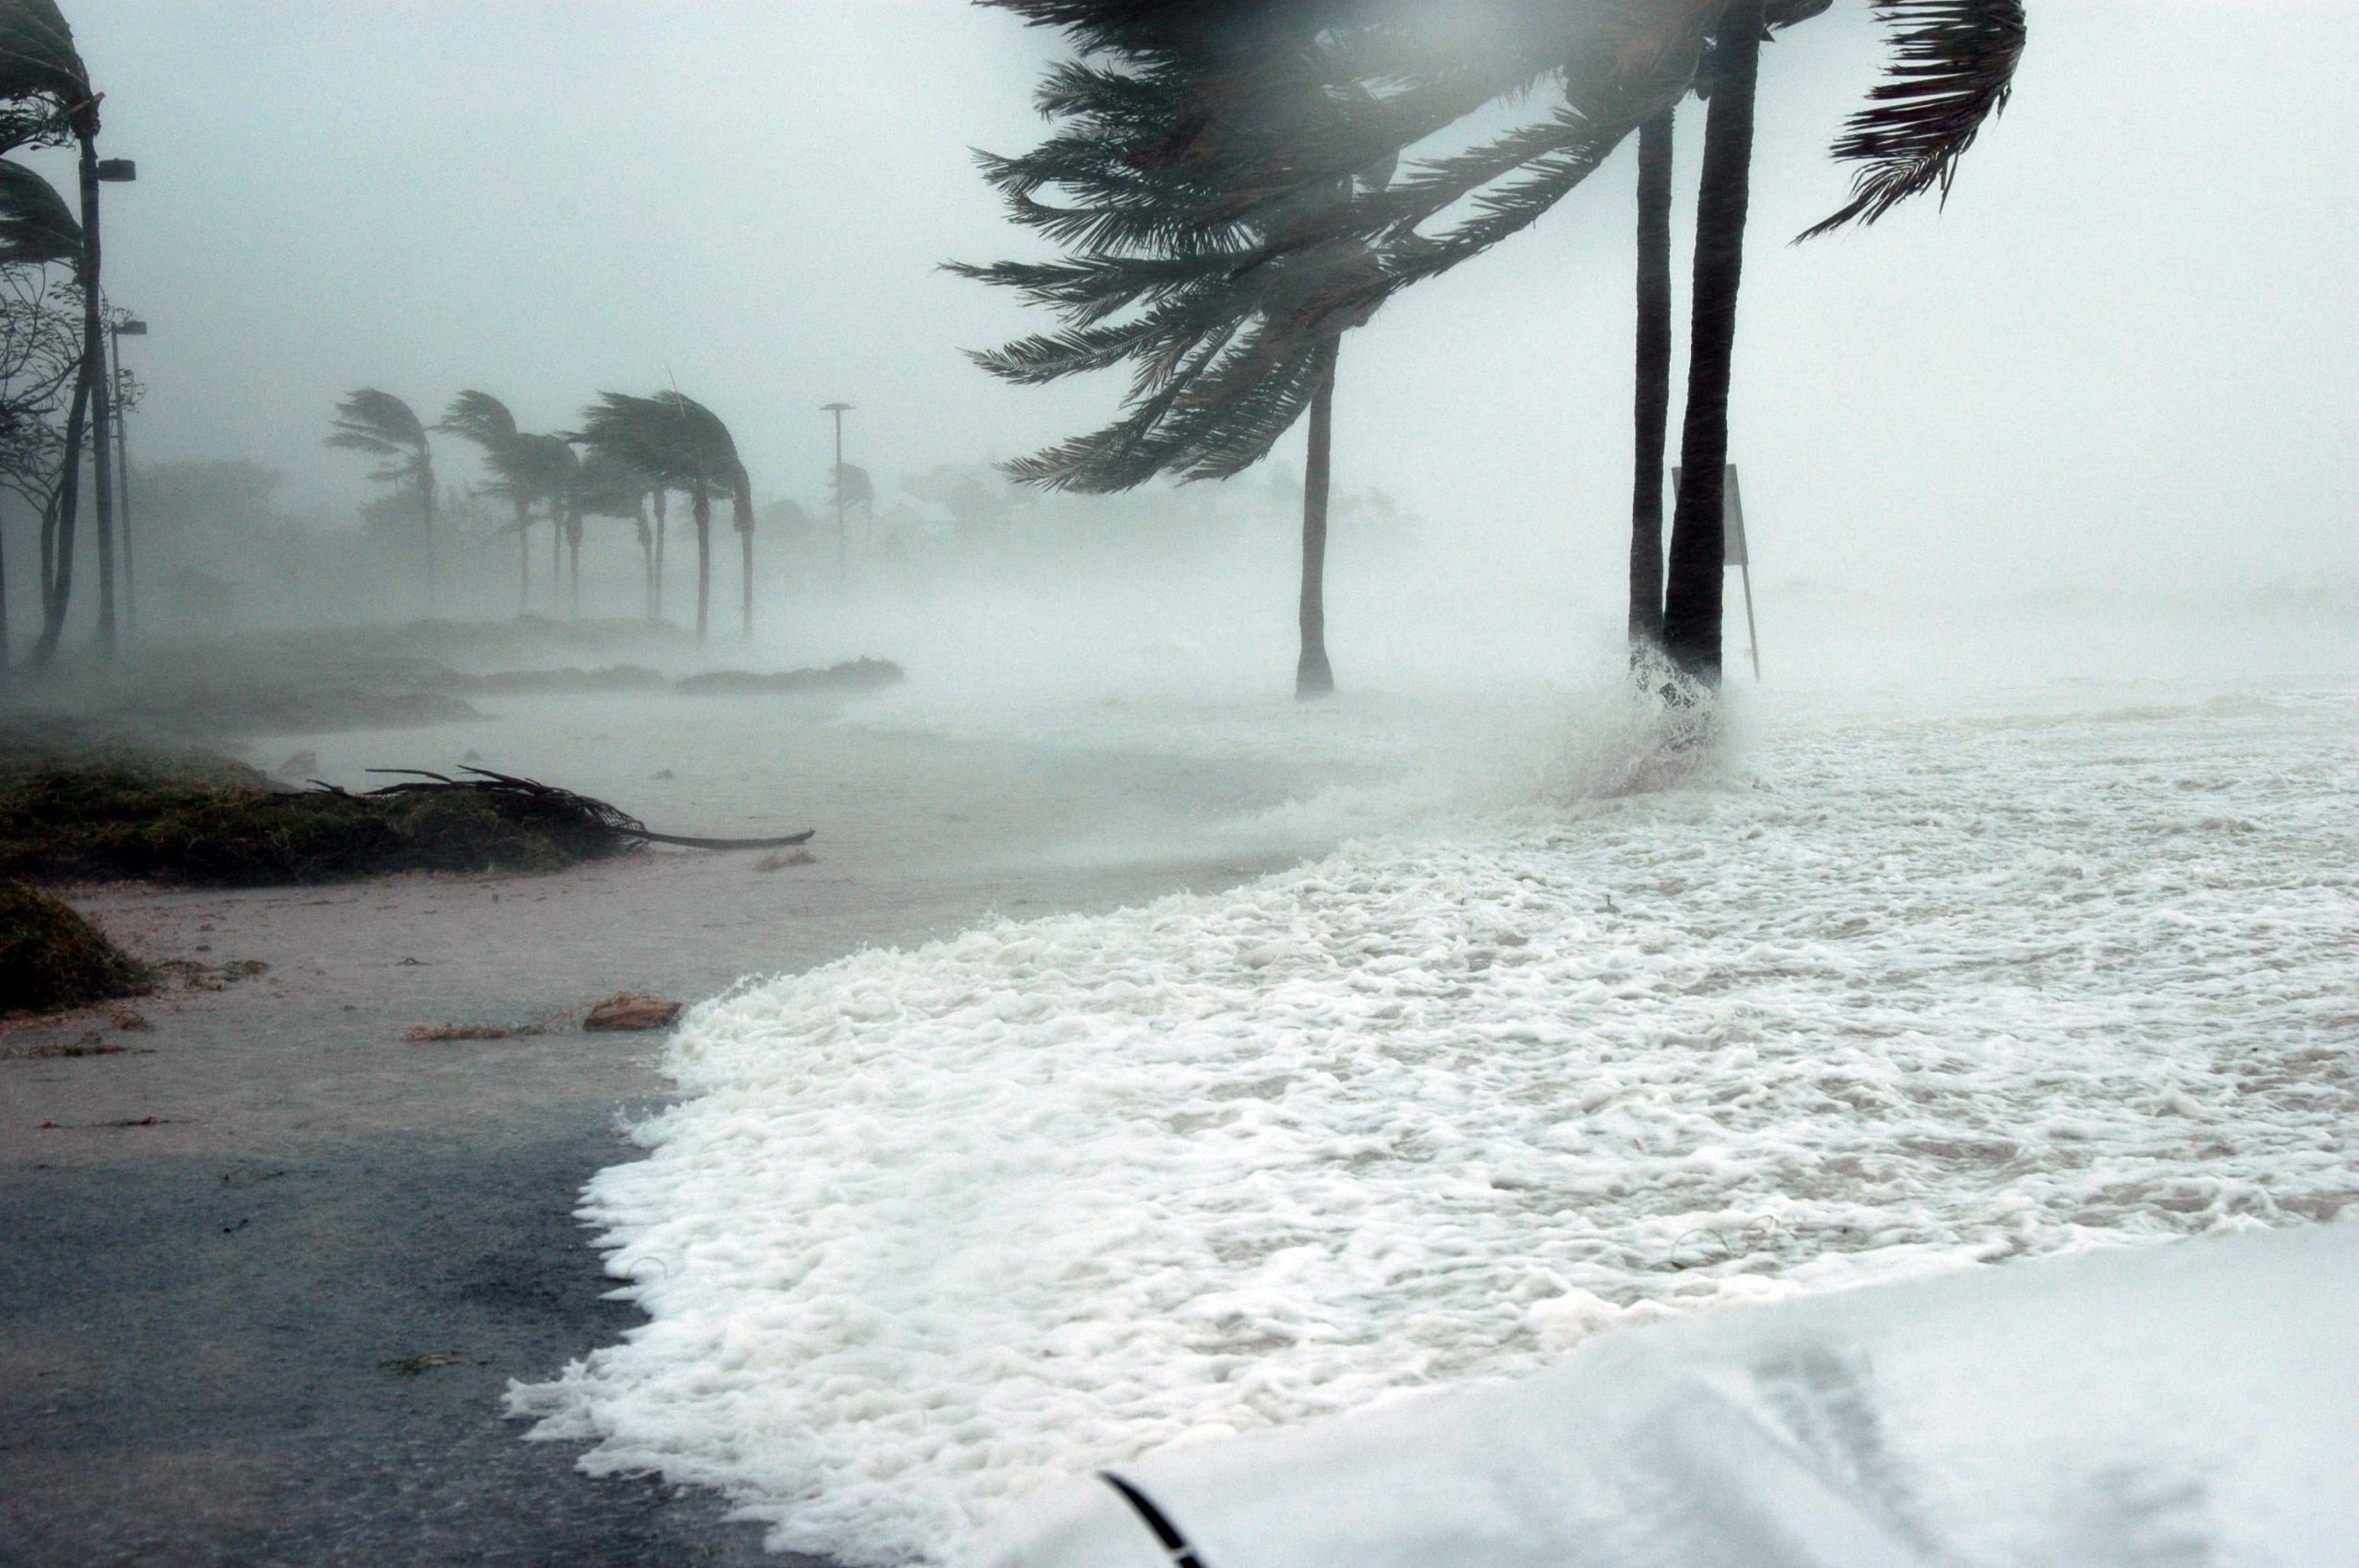 Global Warming Warning: Devastating Hurricanes Could Be Up to Five Times More Likely in the Caribbean - SciTechDaily